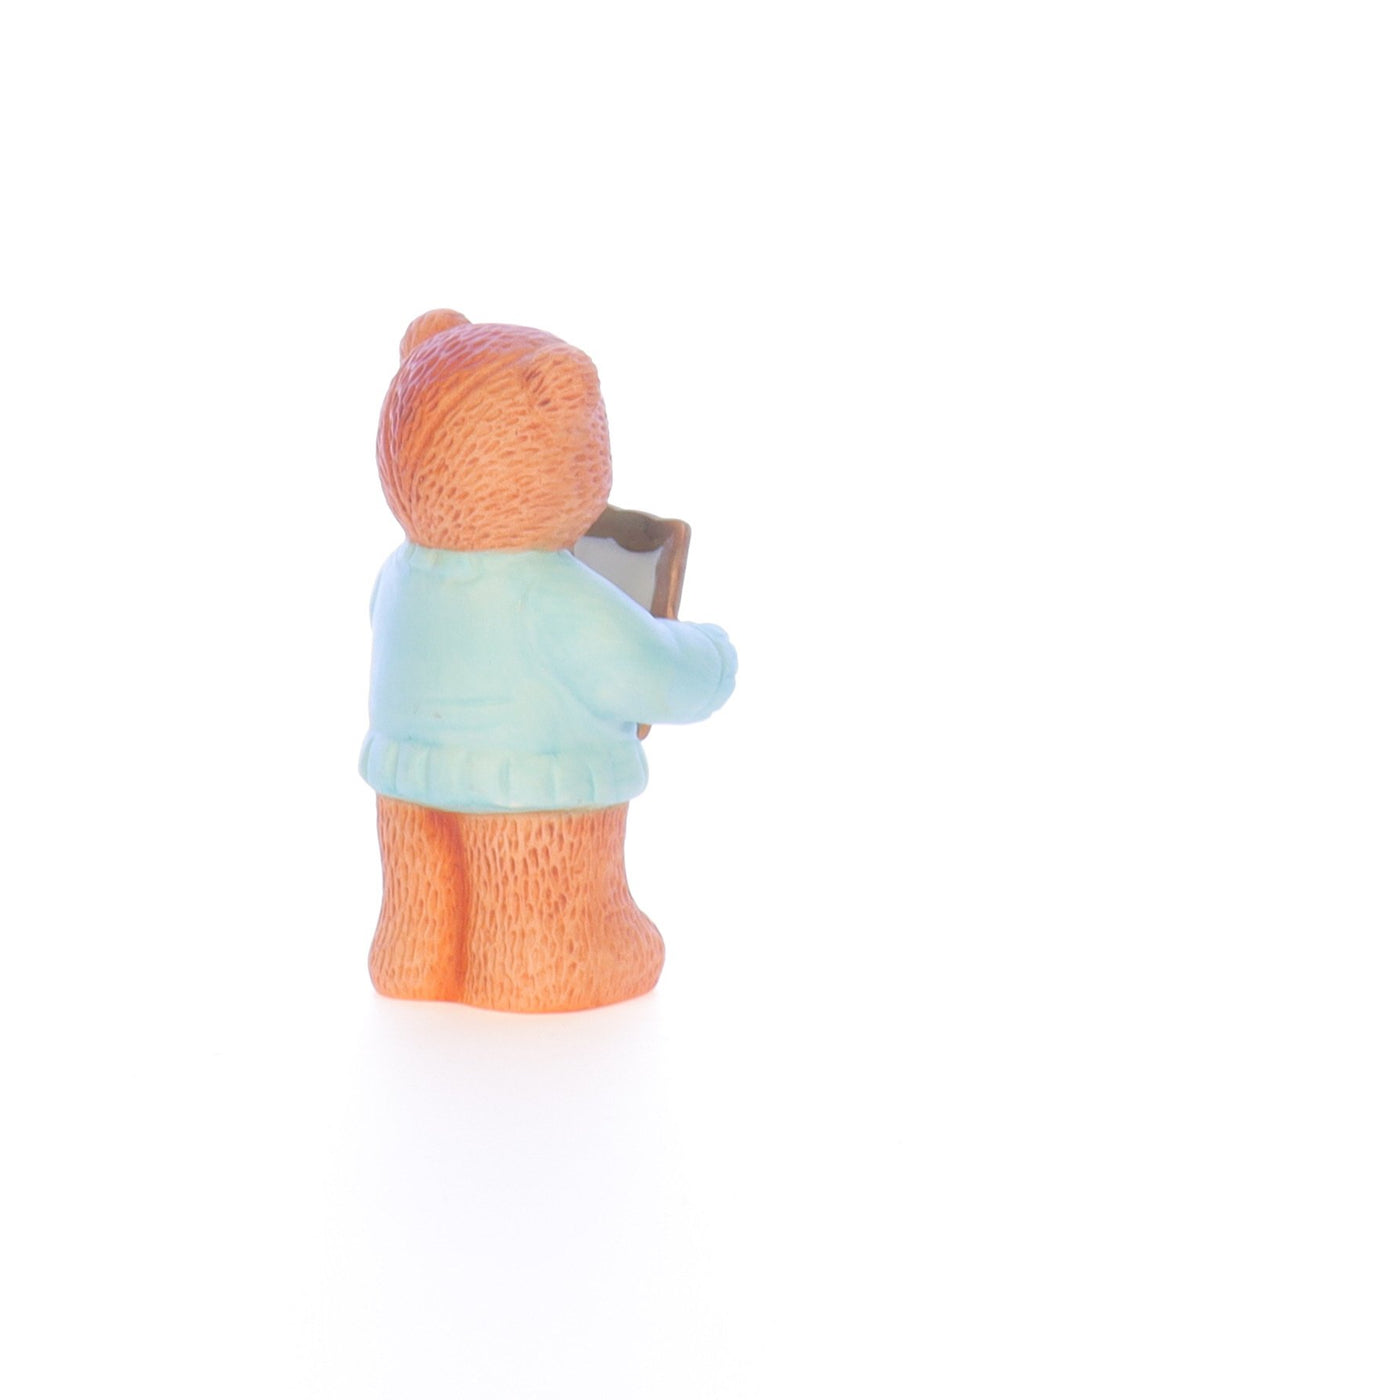 Lucy_And_Me_by_Lucy_Atwell_Porcelain_Figurine_I_Miss_You_Bear_Lucy_Unknown_066_06